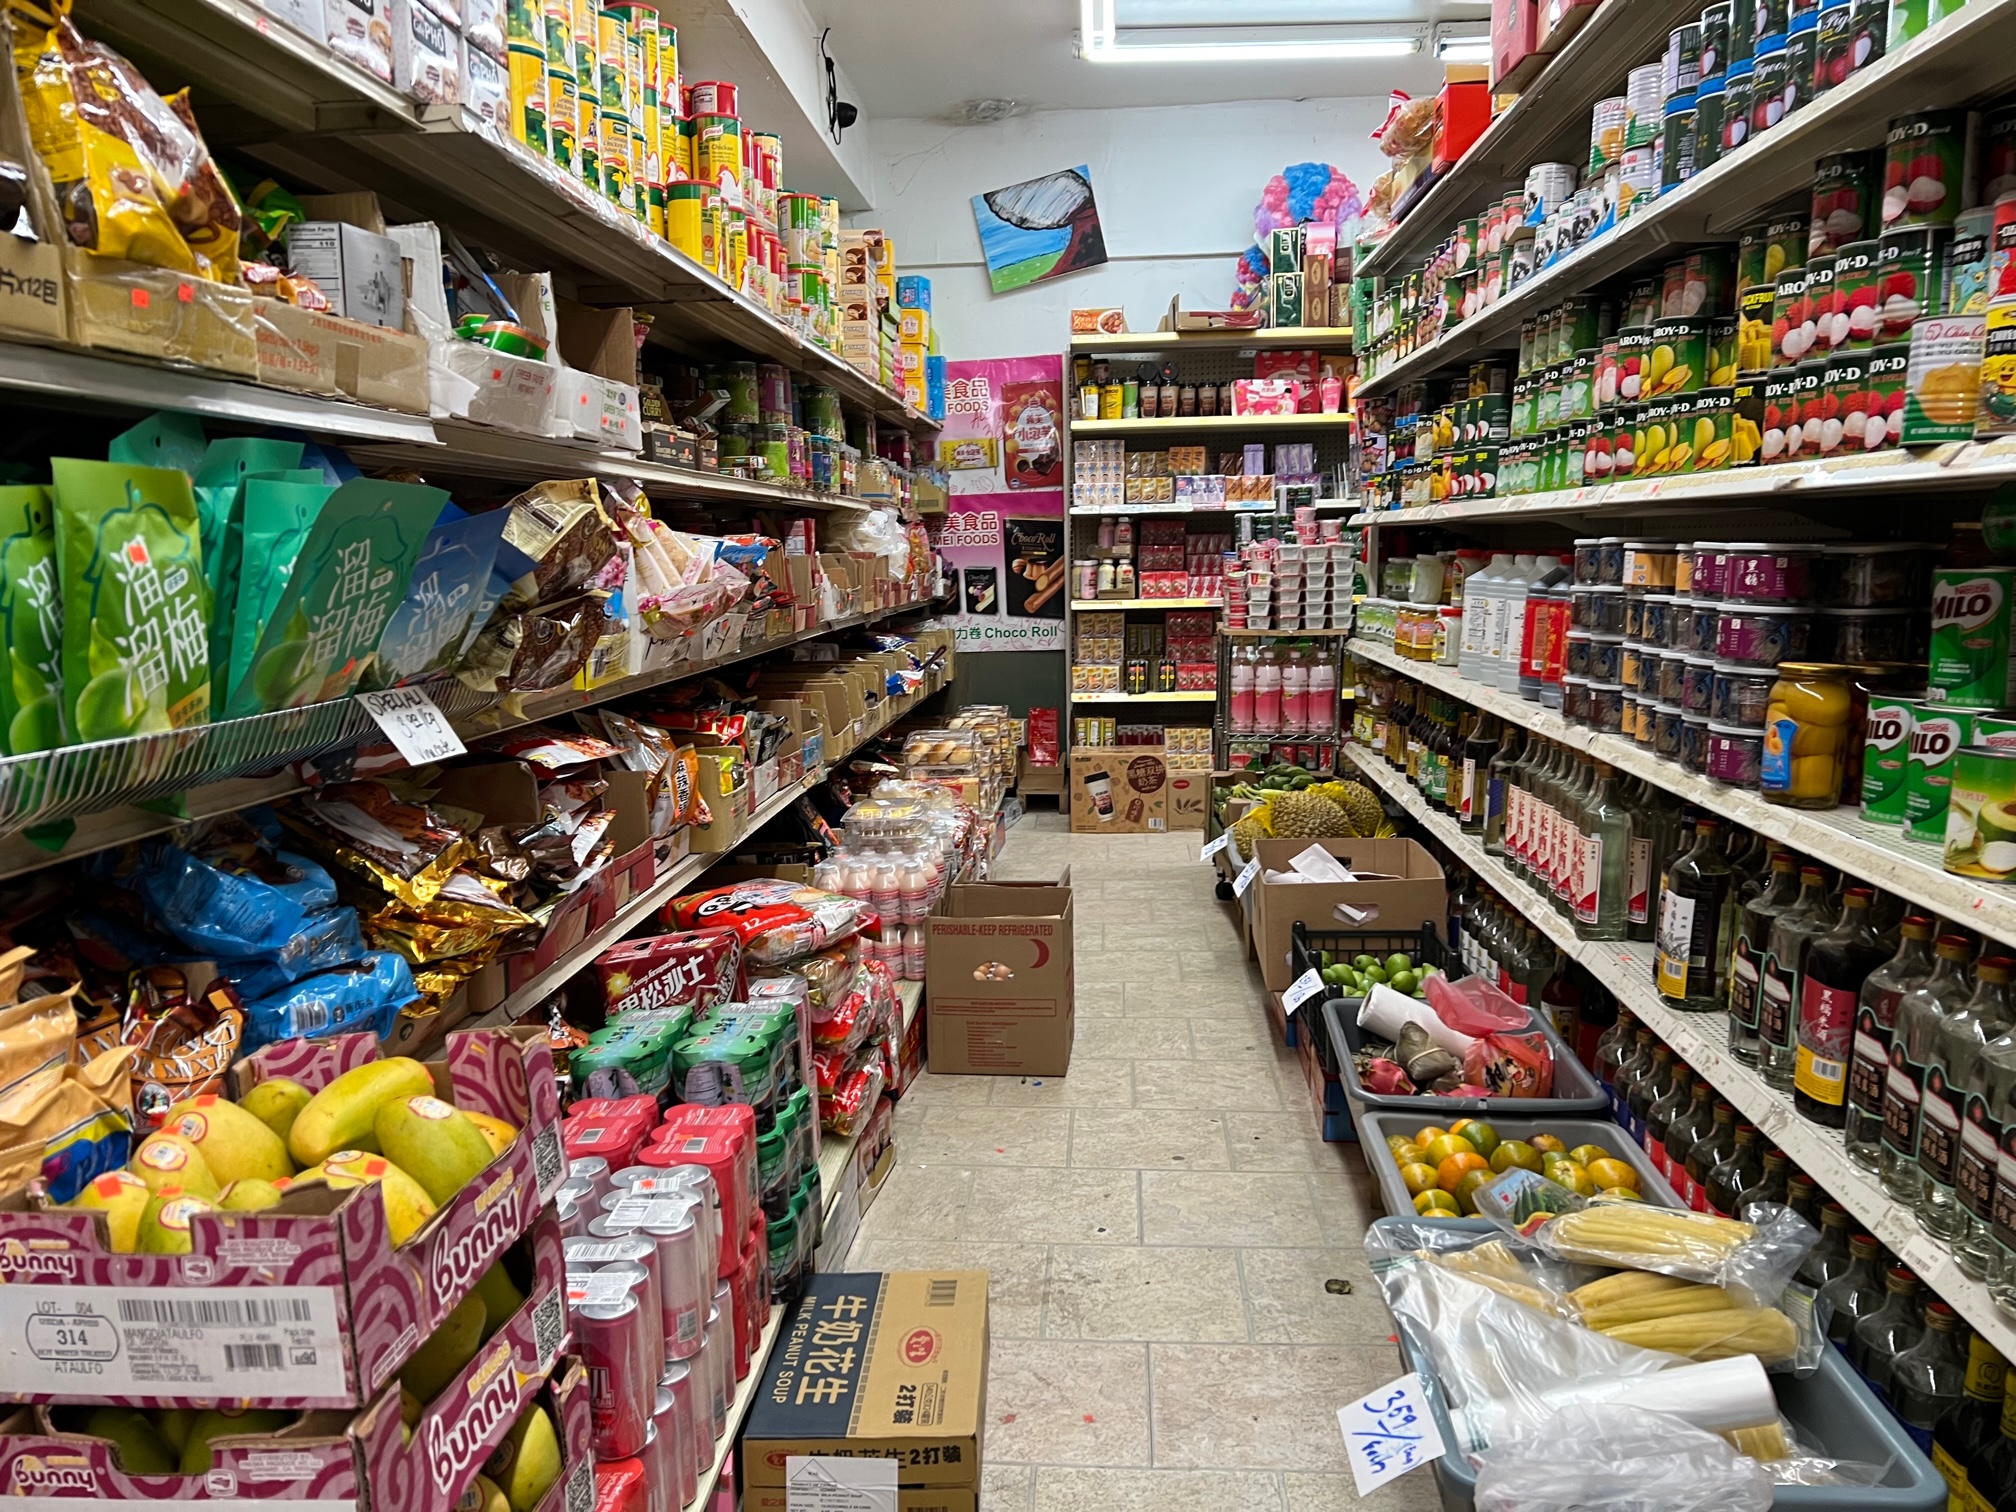 Down one of the aisles at Far East Grocery, there are packages full on the shelves and boxes stacked on top of each other with produce on the ground. Photo by Alyssa Buckley.